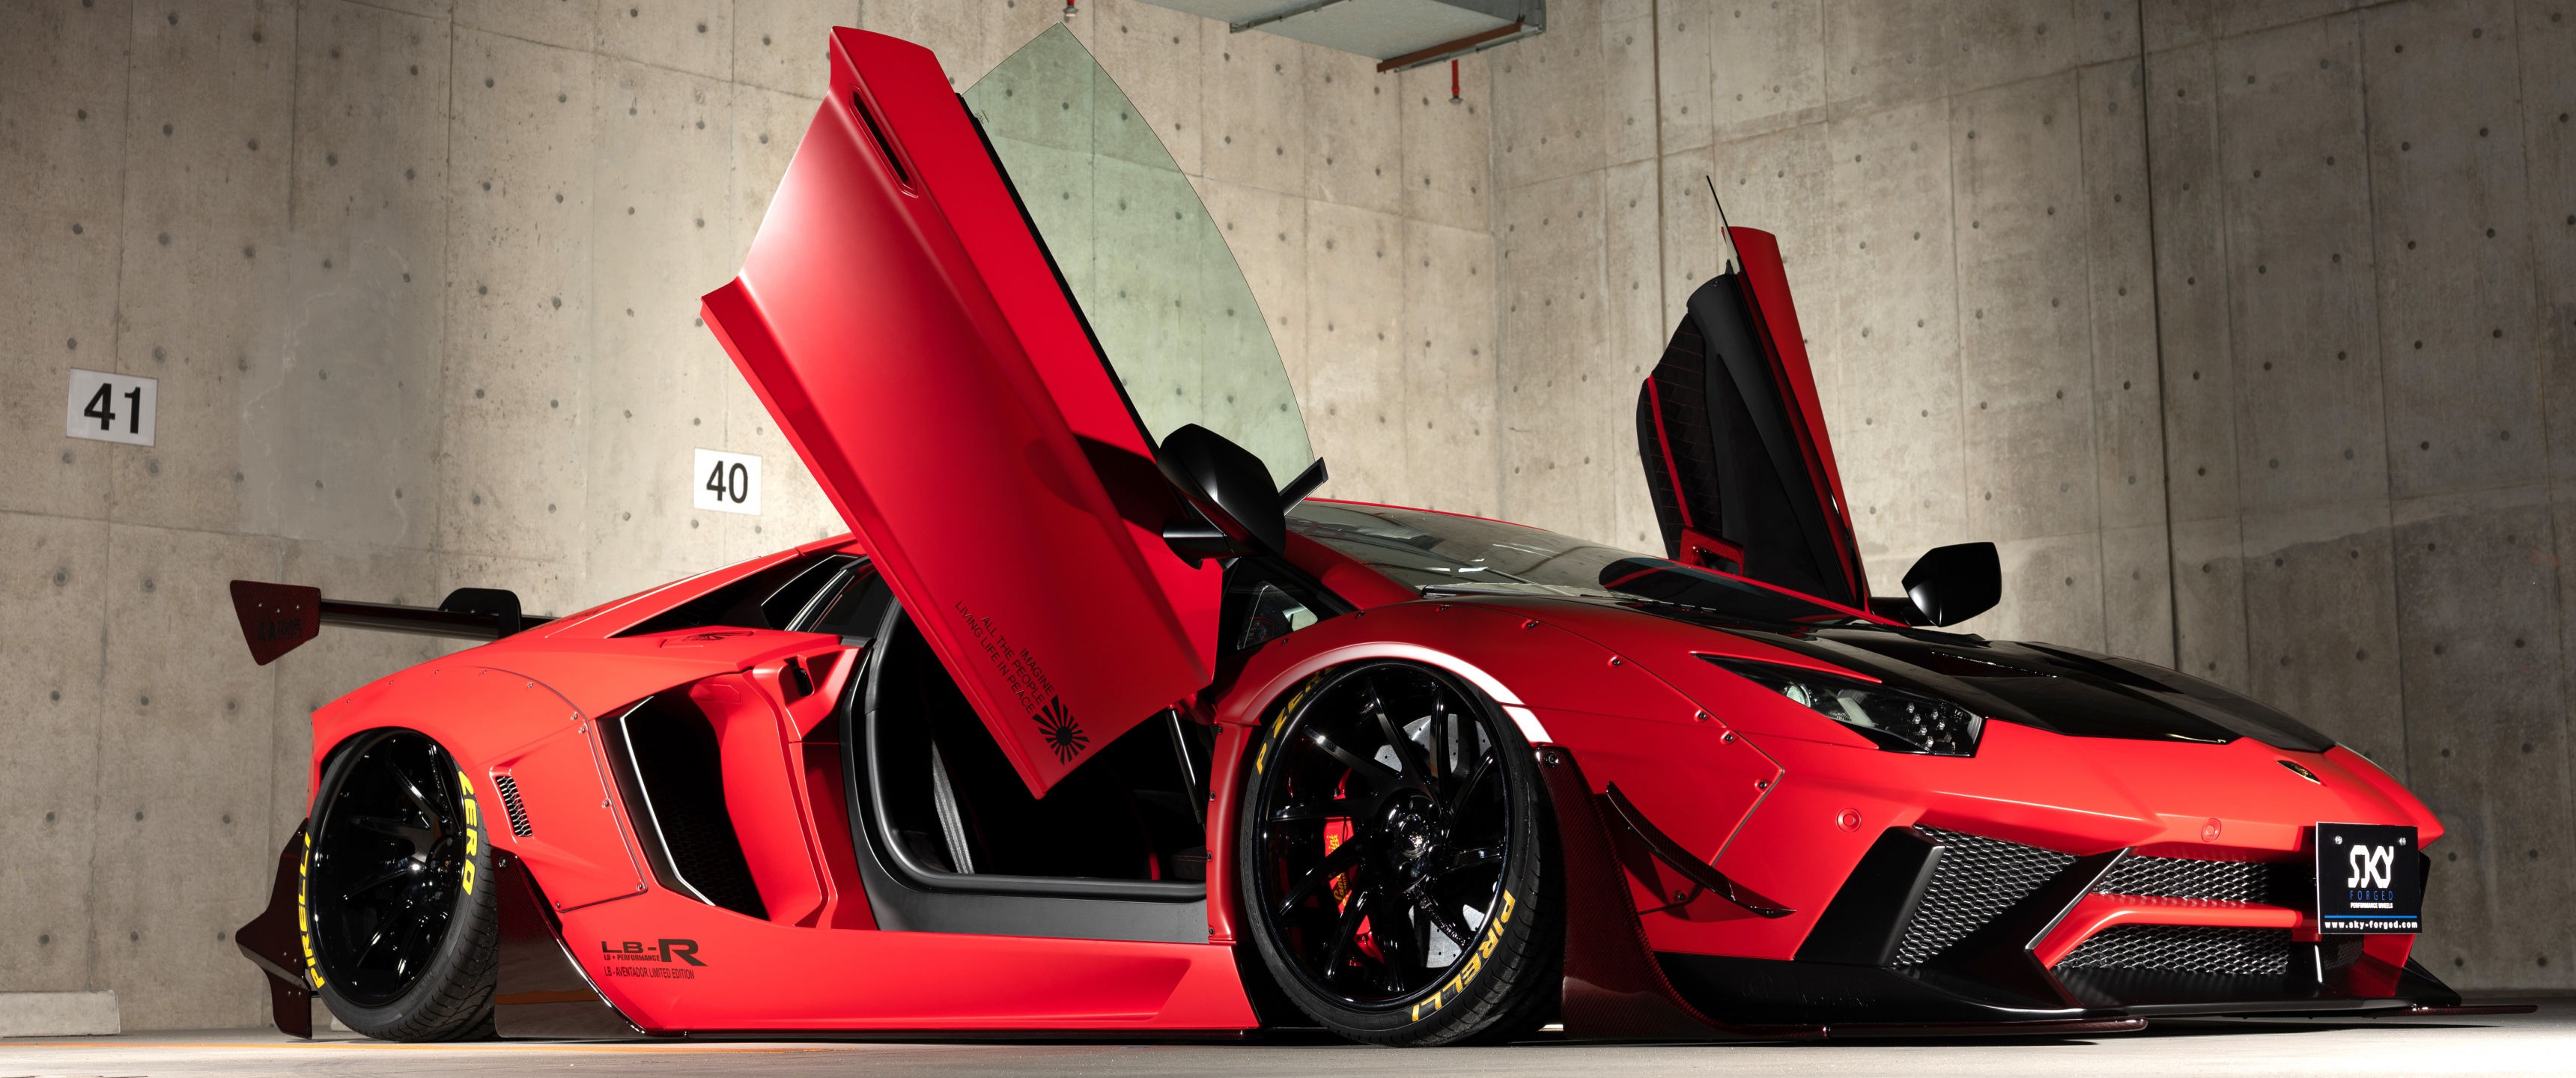 1900 x 1080] my favorite Lamborghini wallpaper for all the car lovers here  : r/wallpapers